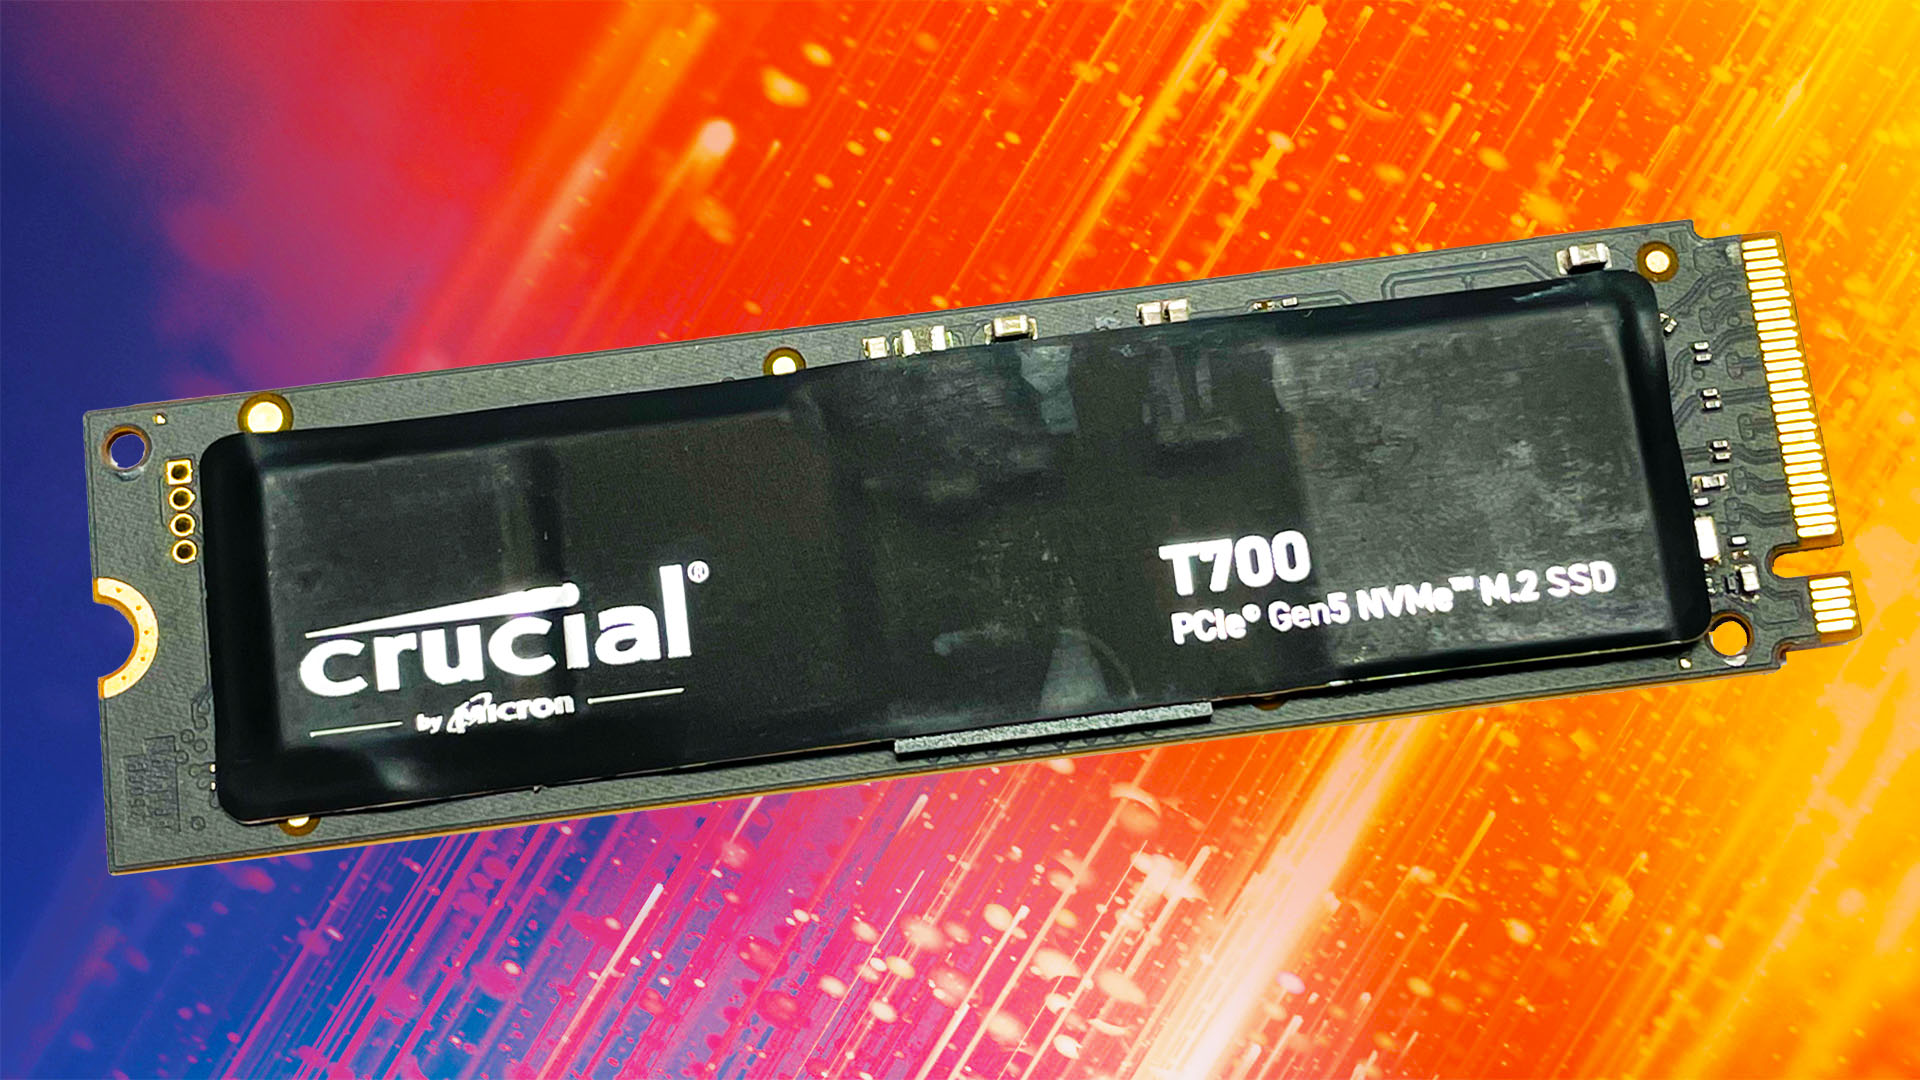 Crucial T700 review: 2 TB Crucial T700 SSD on blue and orange background